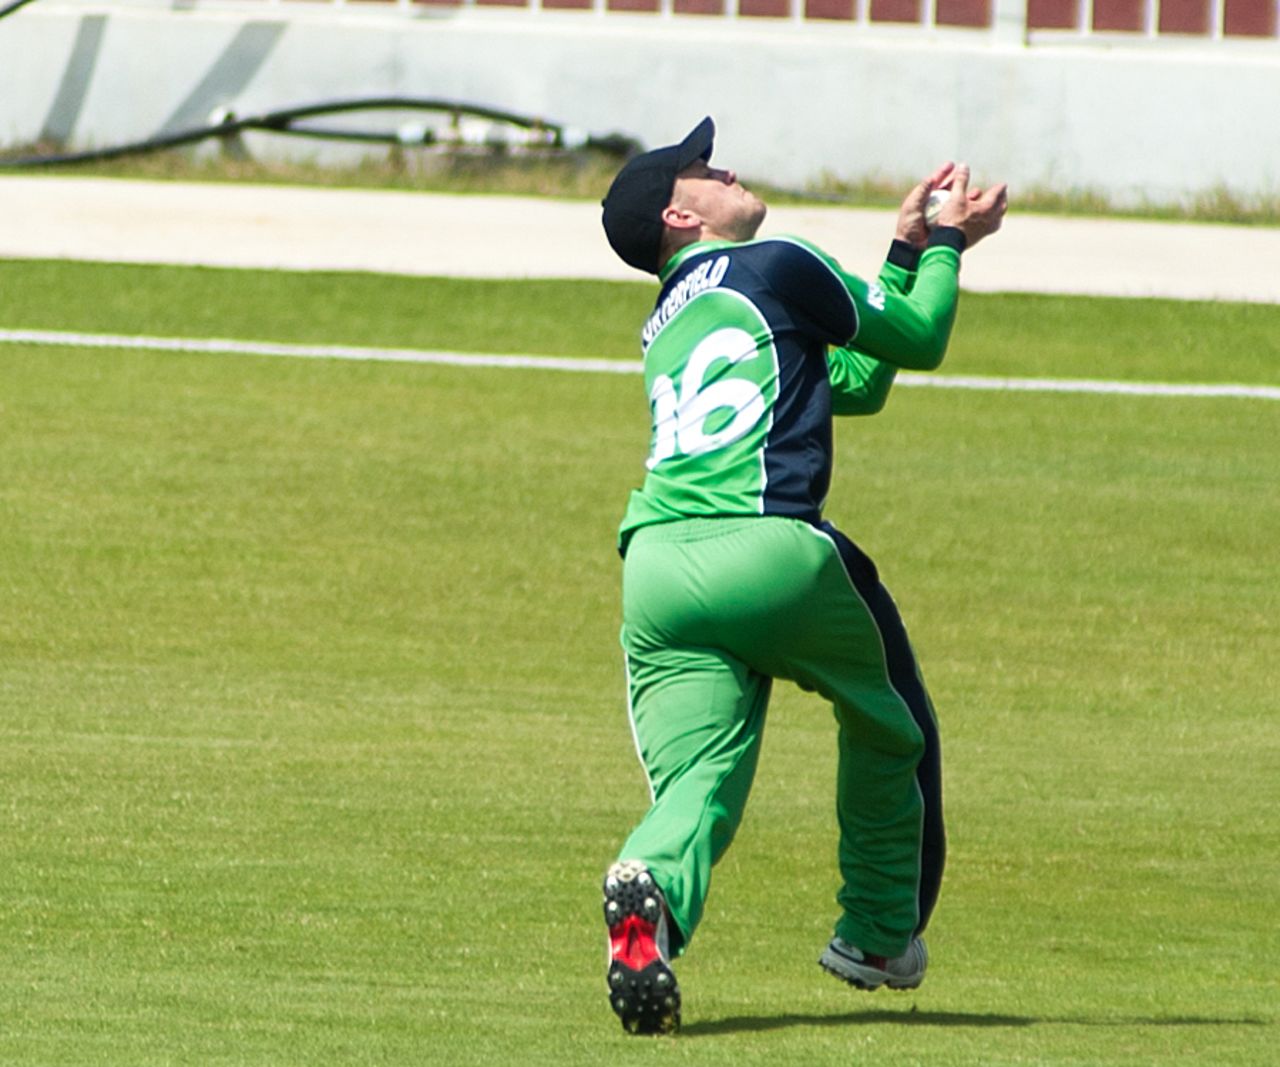 William Porterfield took three catches and scored a match-winning 77, United Arab Emirates v Ireland, ICC World Cricket League Championship, Sharjah, March 20, 2013